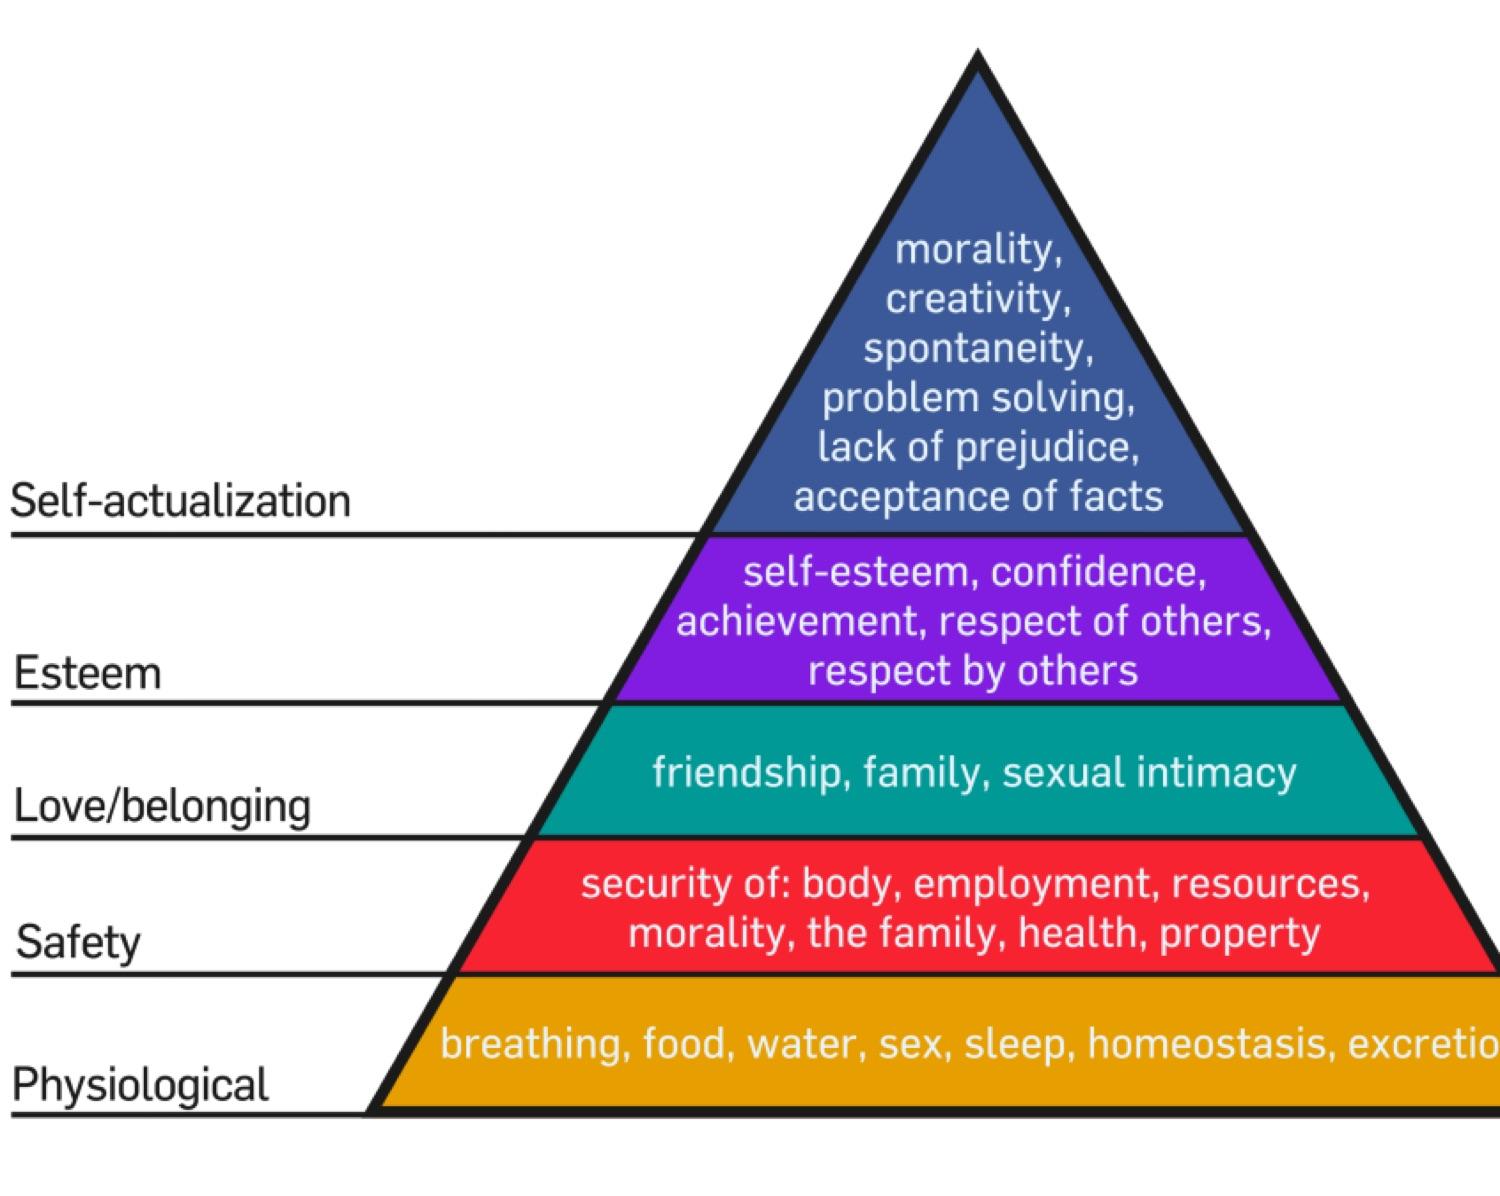 Maslow’s “Hierarchy” Or “Pyramid Of Needs”